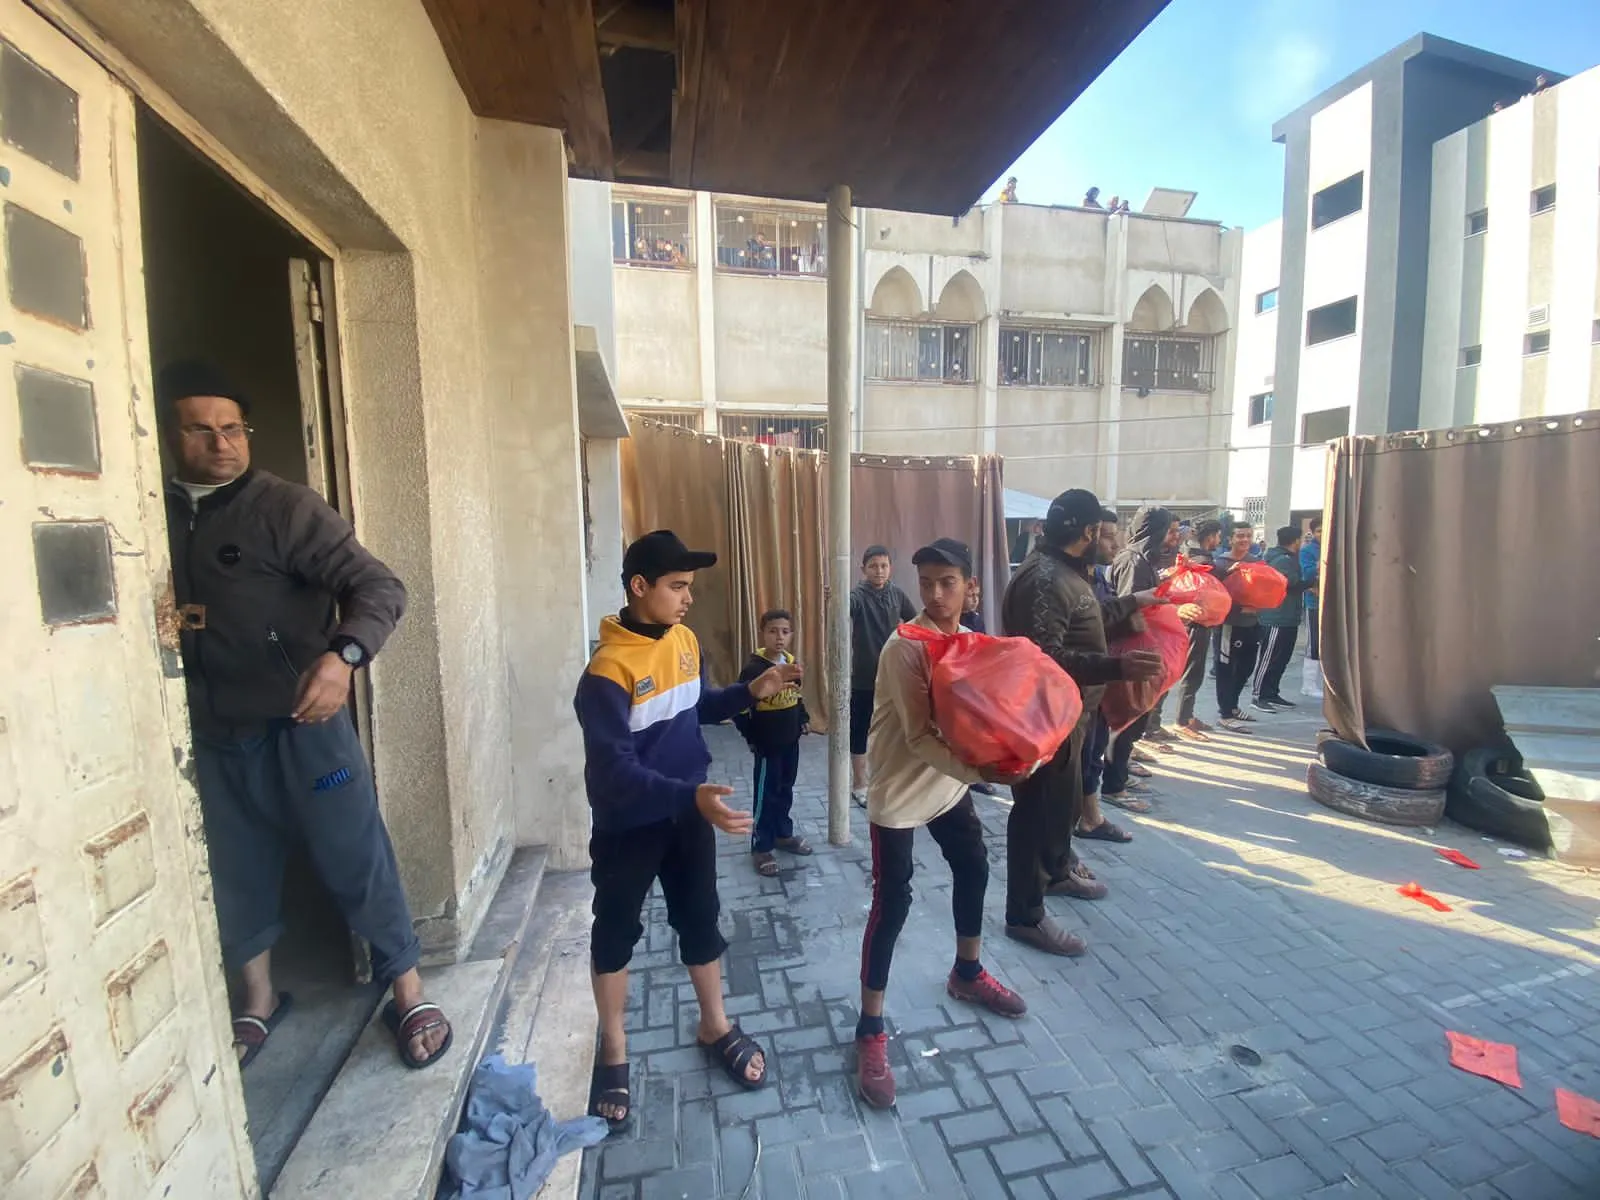 A line of people pass bags of supplies to the door of a building.